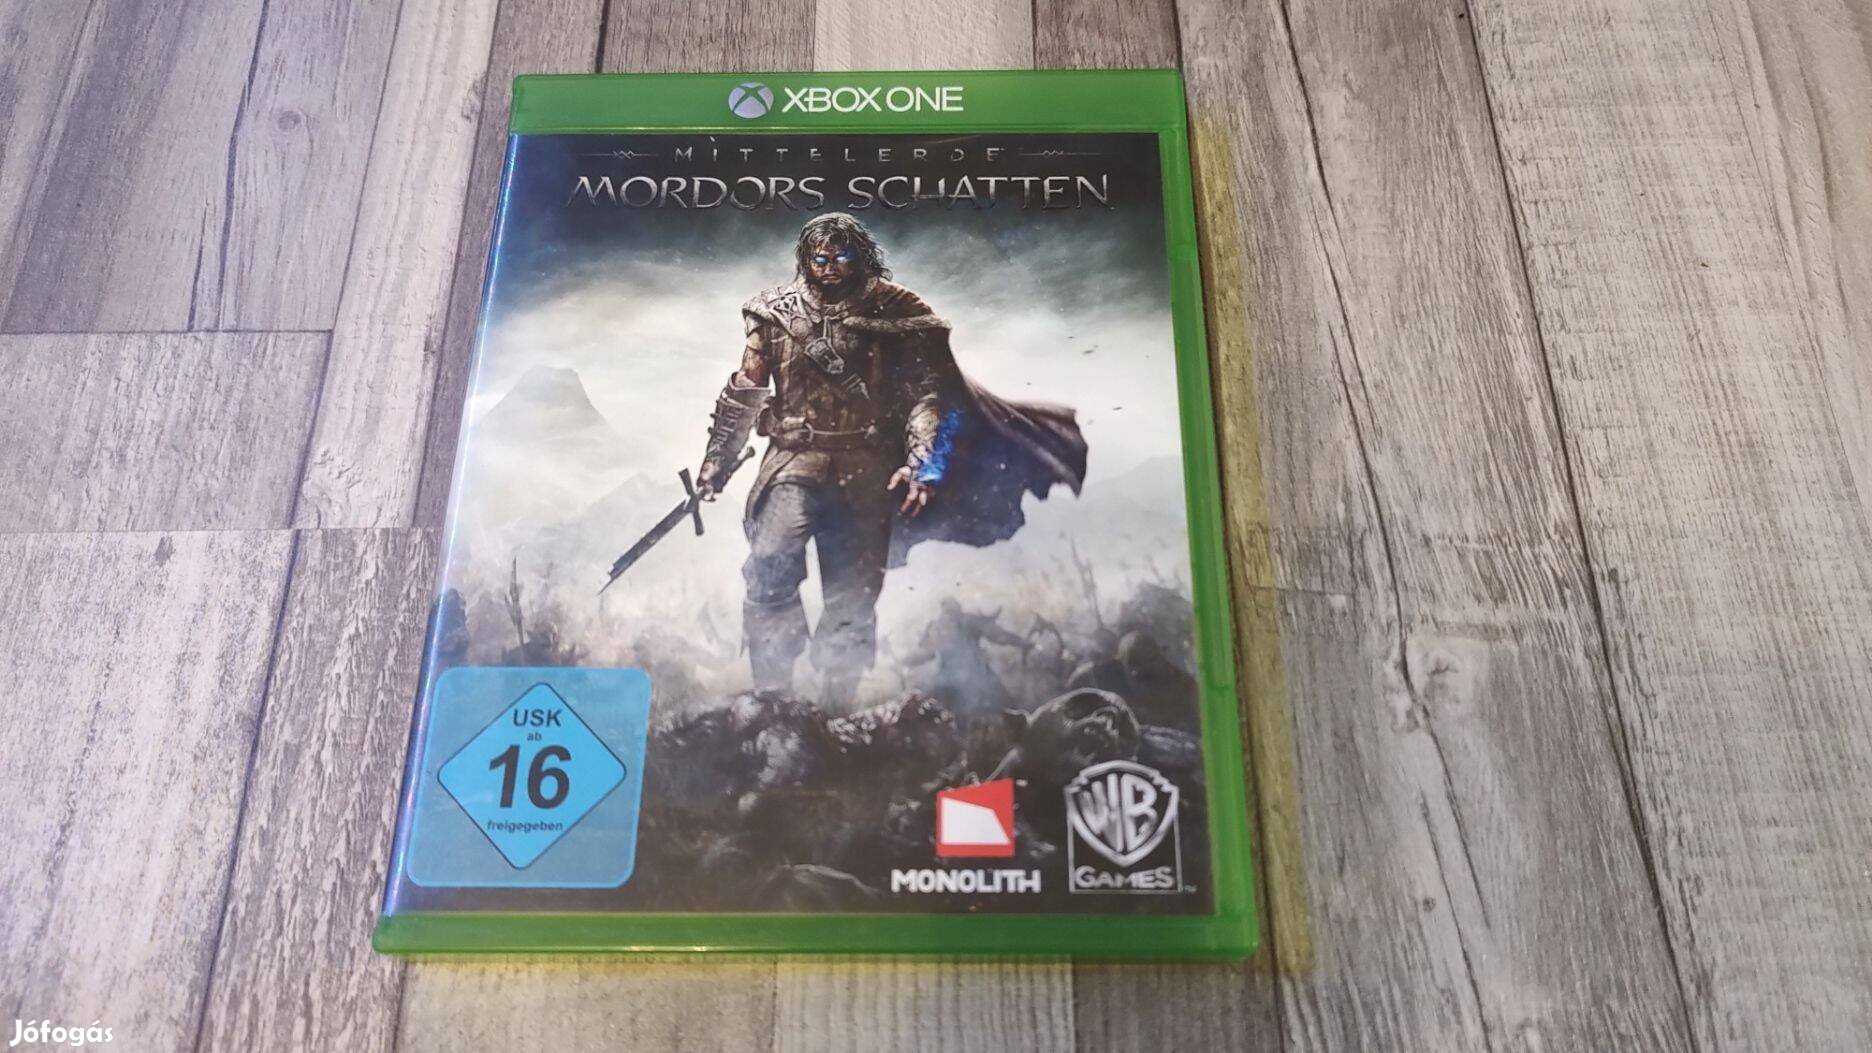 Xbox One(S/X)-Series X : Middle Earth Shadow Of Mordor